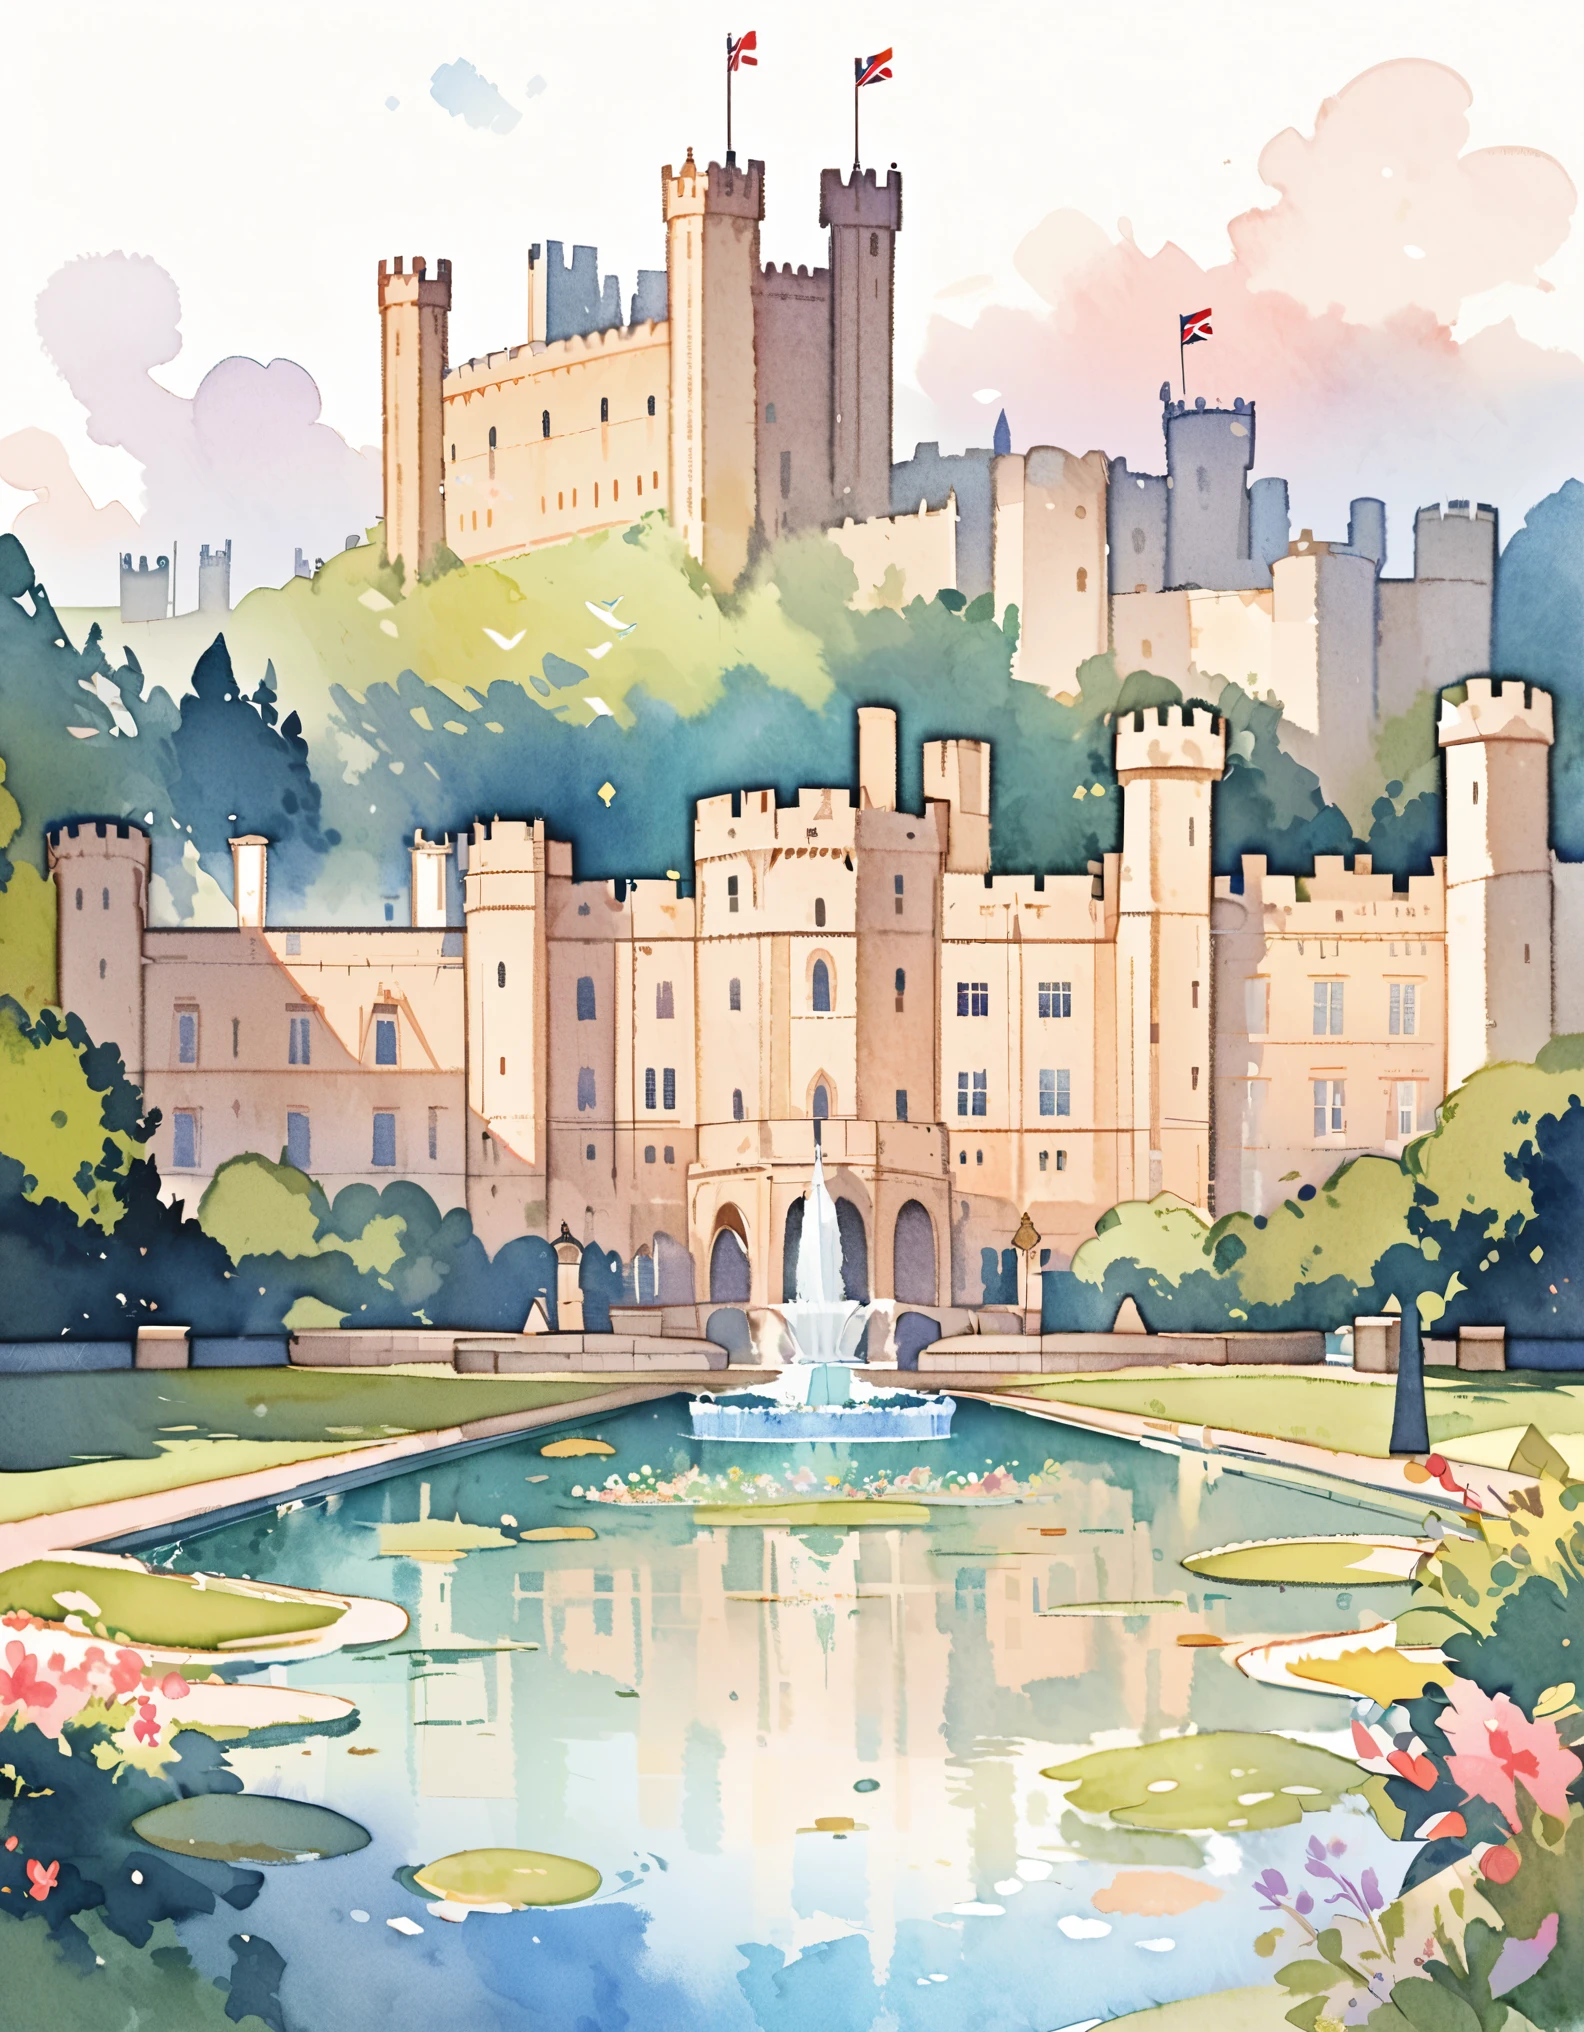 Windsor Castle, The official royal residence of the British monarch, Silent Palace, Castles in England, Watercolor:1.2, Whimsical and delicate, Like an illustration in a children&#39;s book, Gentle brushwork, Dim, The pale colors create a fantastical look.